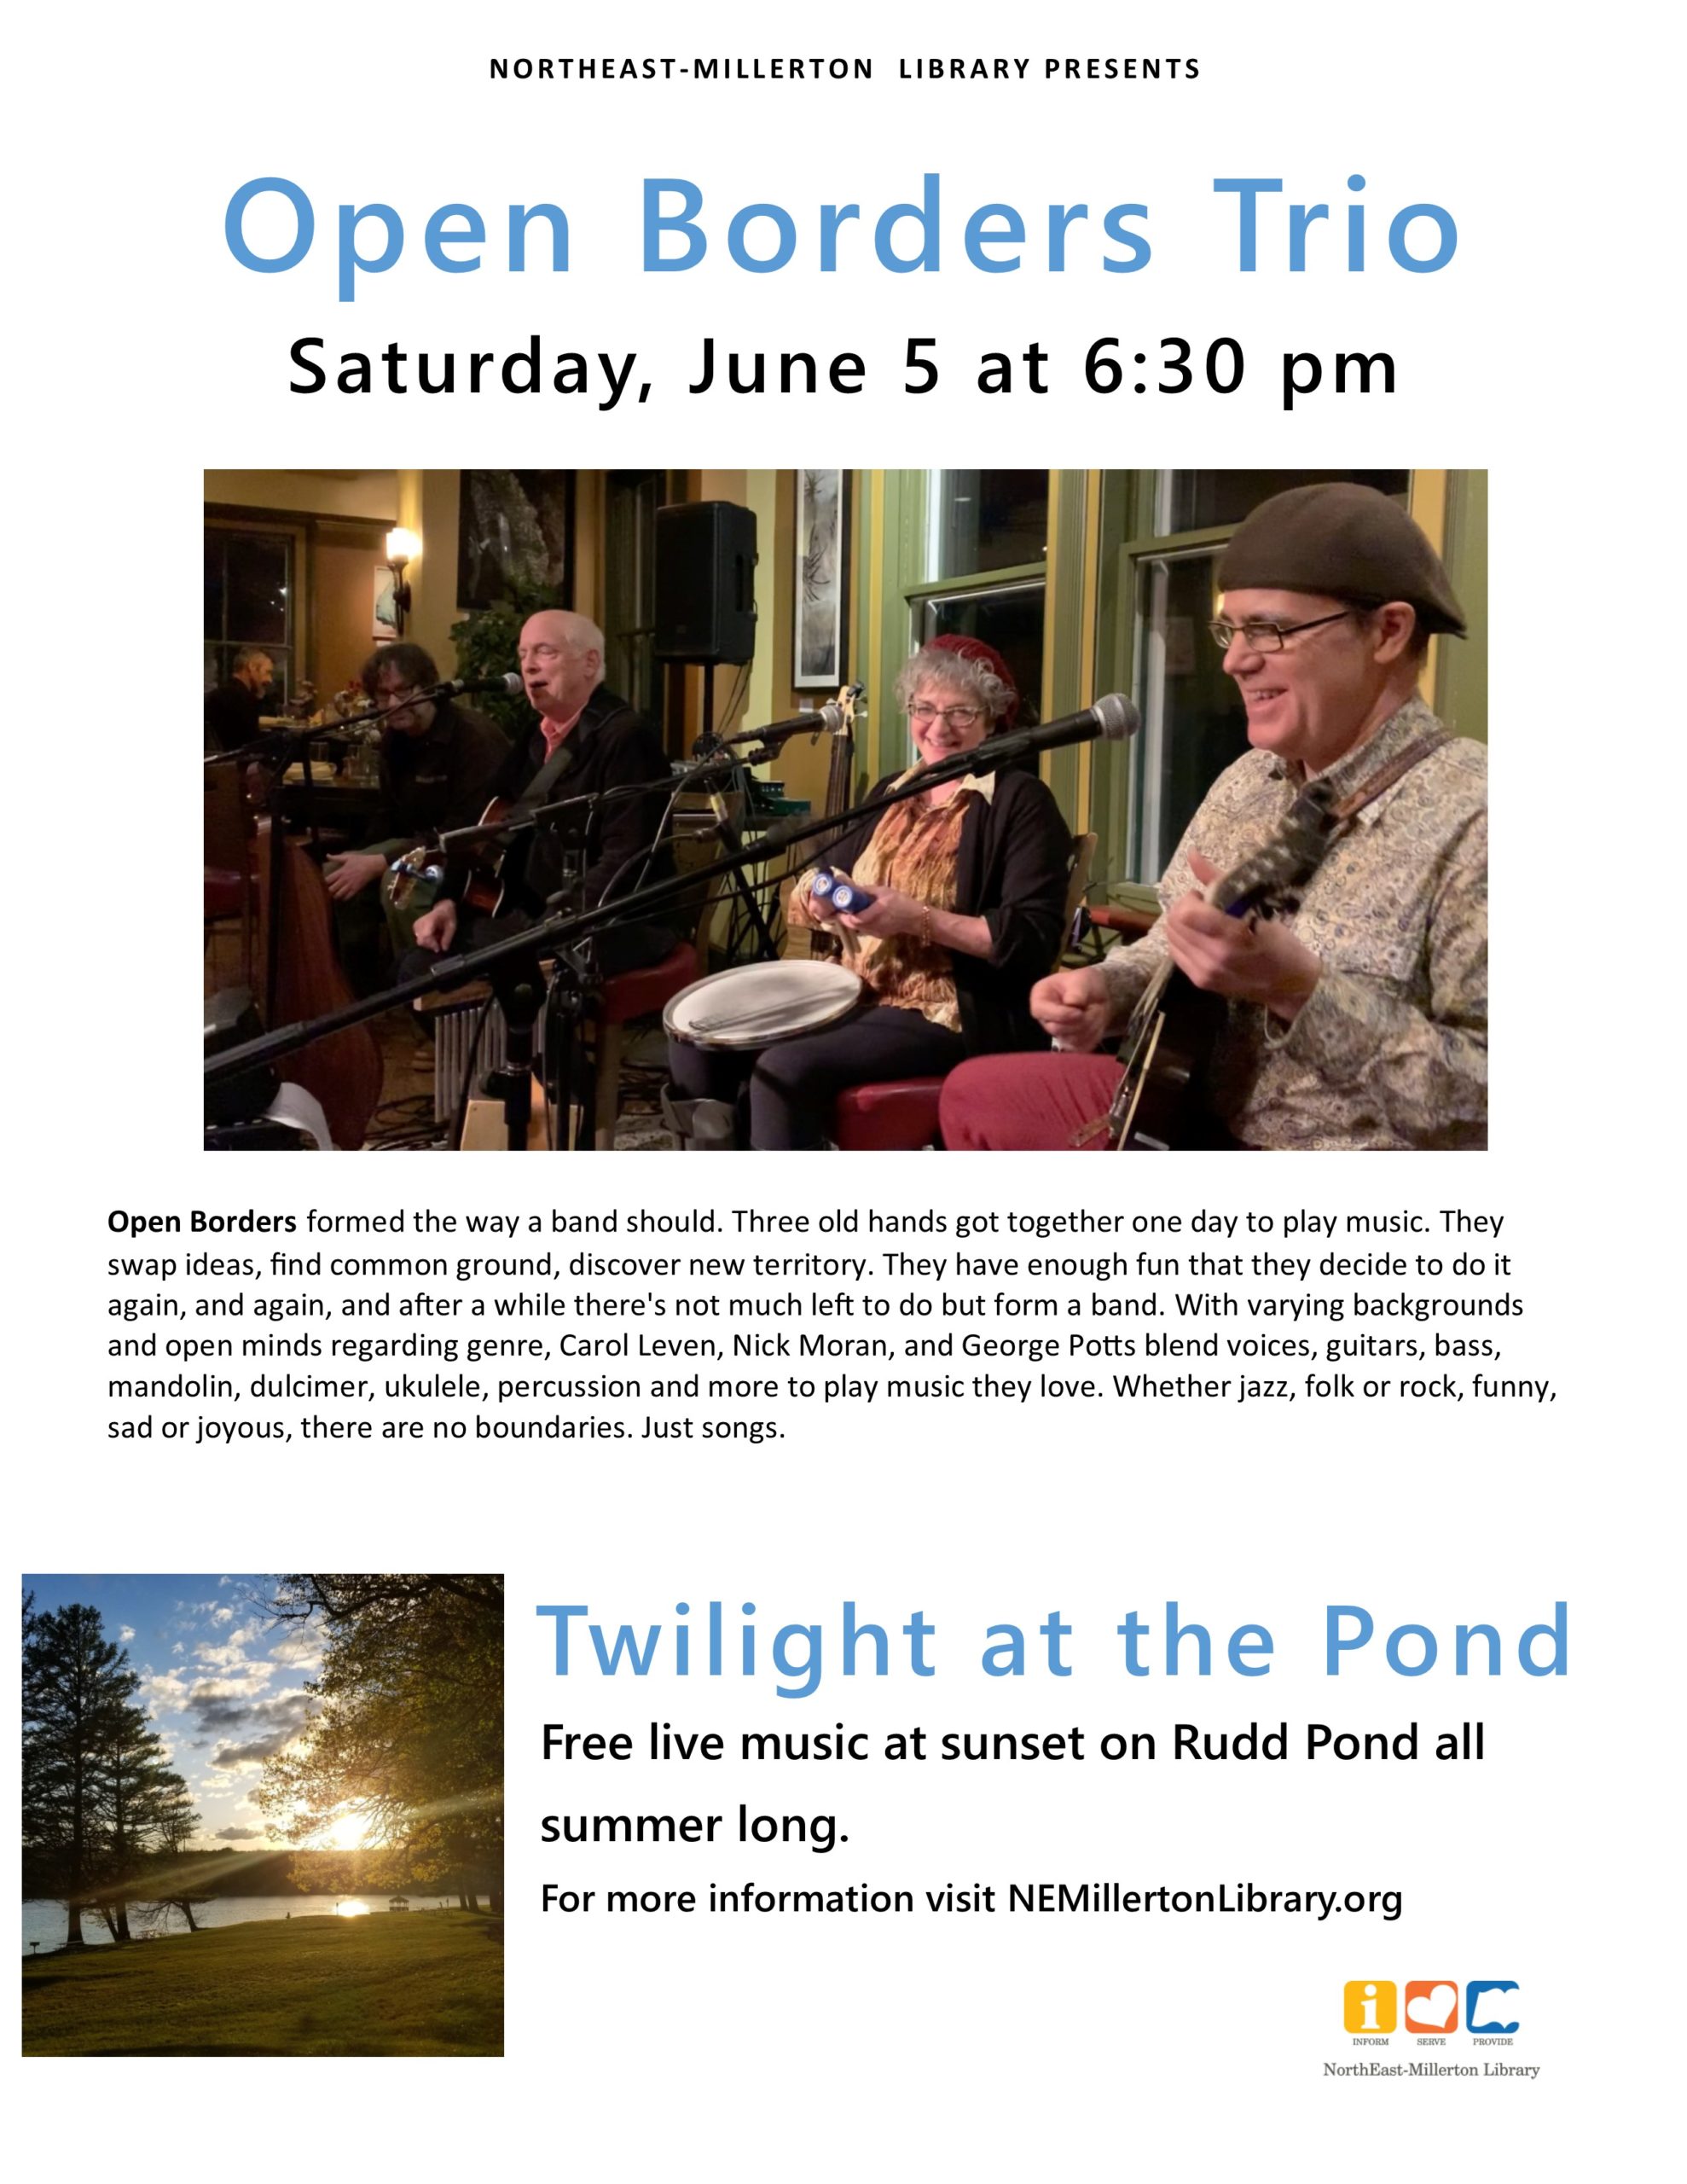 Open Boarder Trio June 5 at 6:30 pm at Rudd Pond State Park